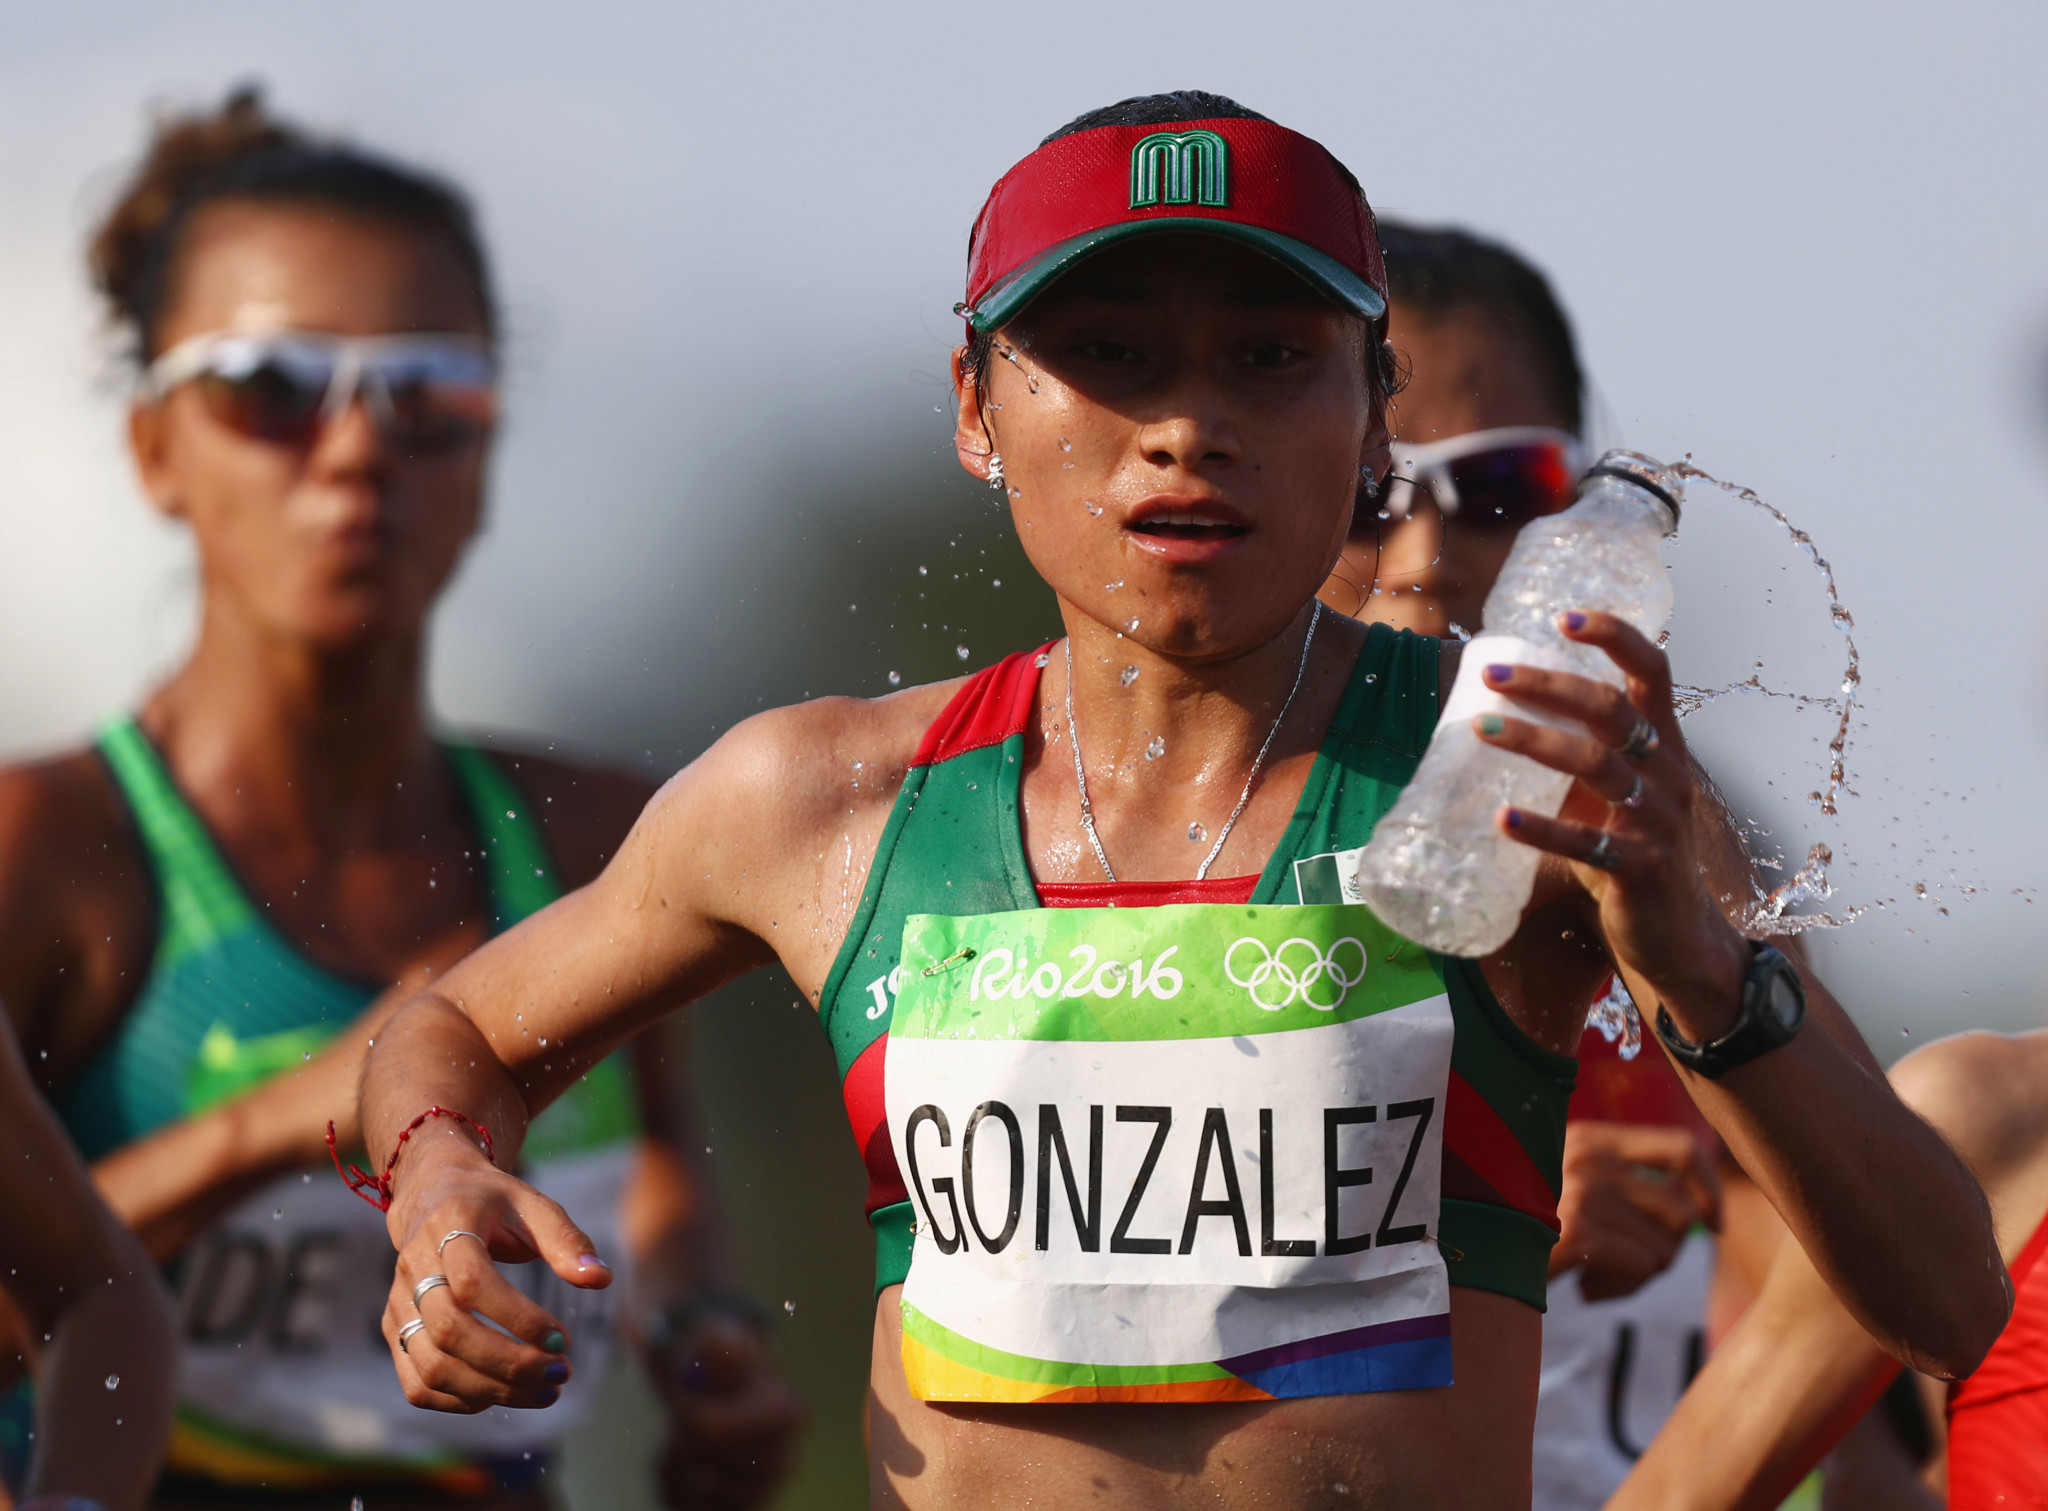 Race walker González fails with drugs ban appeal and now faces false evidence charge